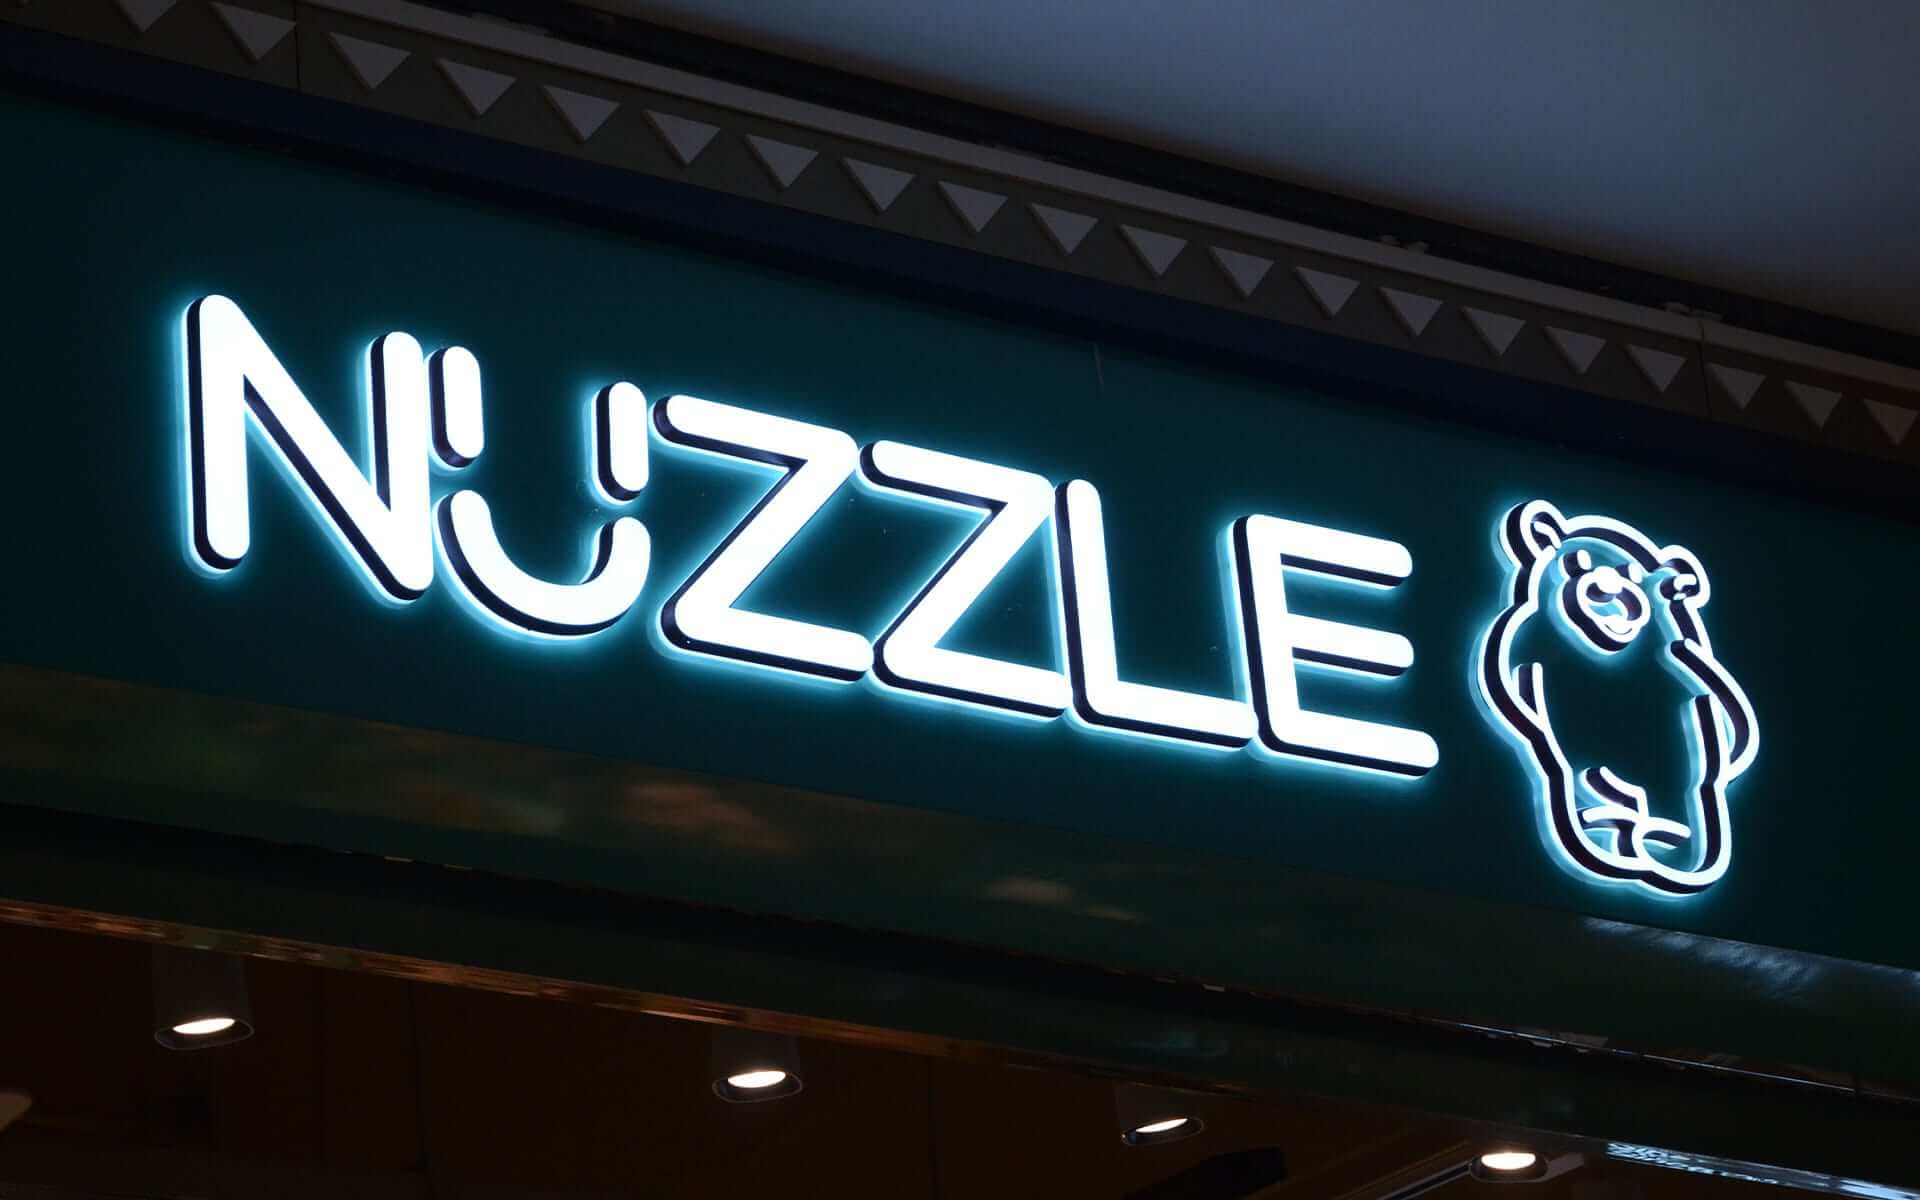 Face and Back-lit Acrylic Channel Letters for Nuzzle